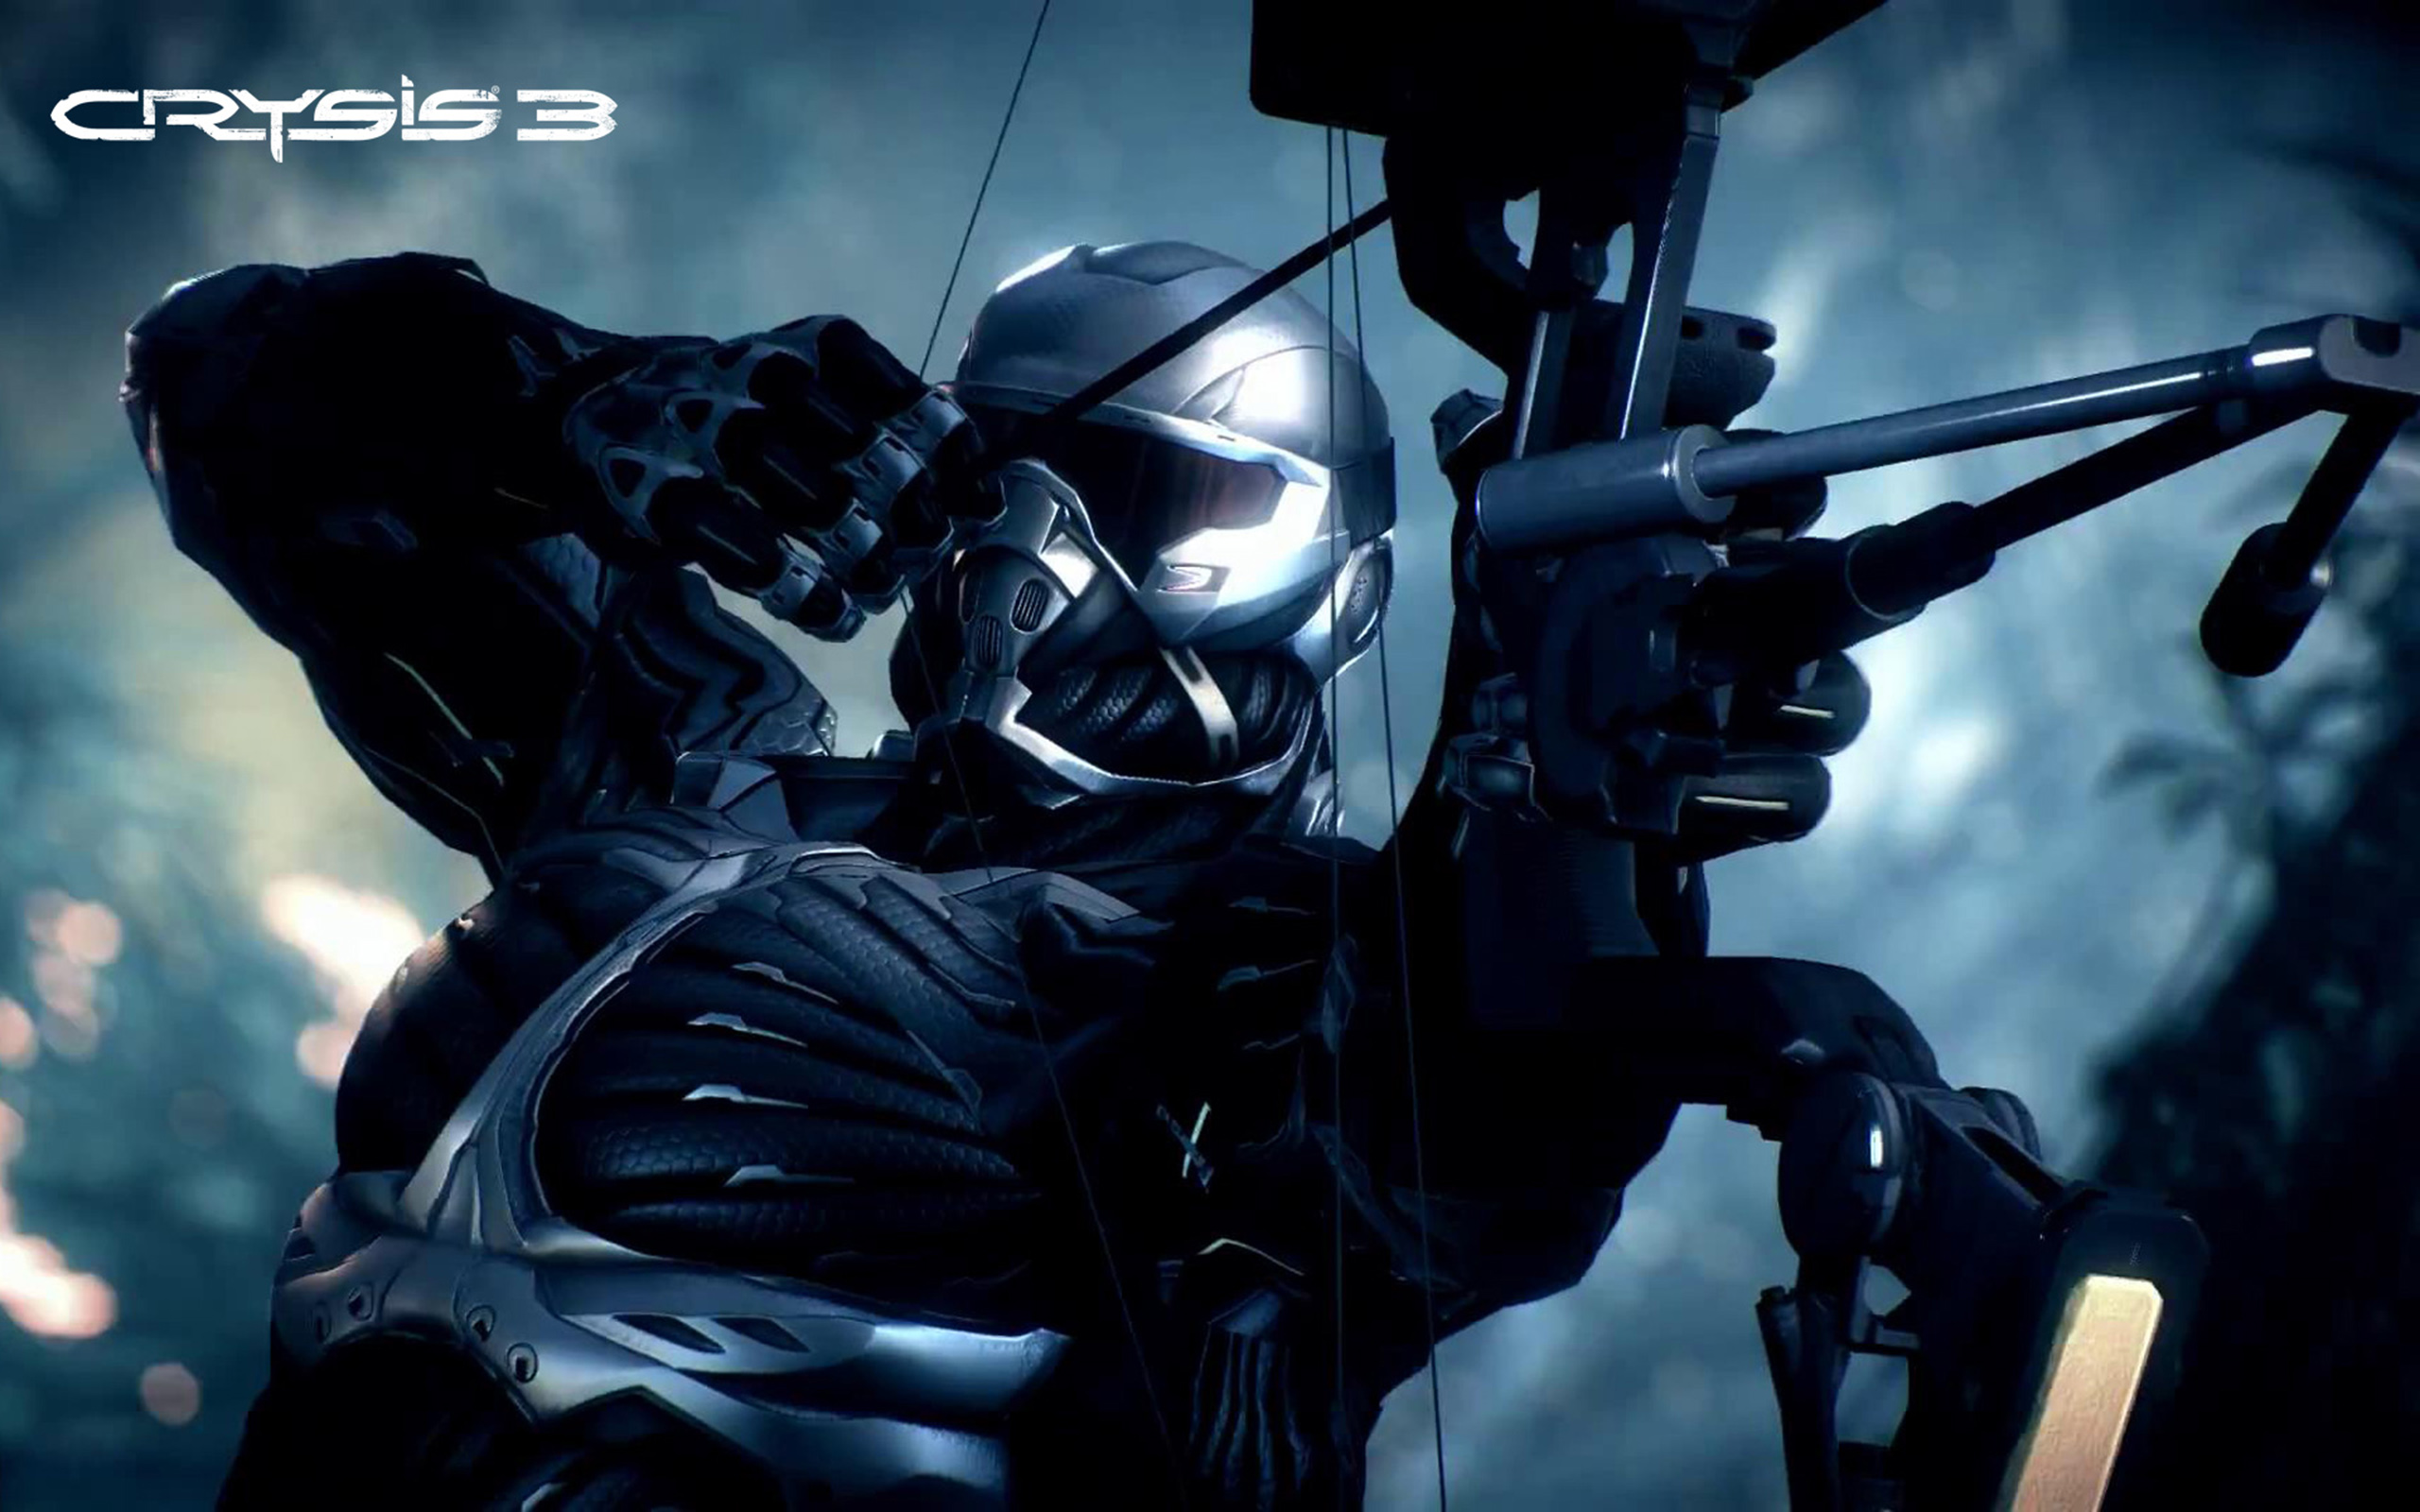 crysis, video game, crysis 3, laurence 'prophet' barnes images